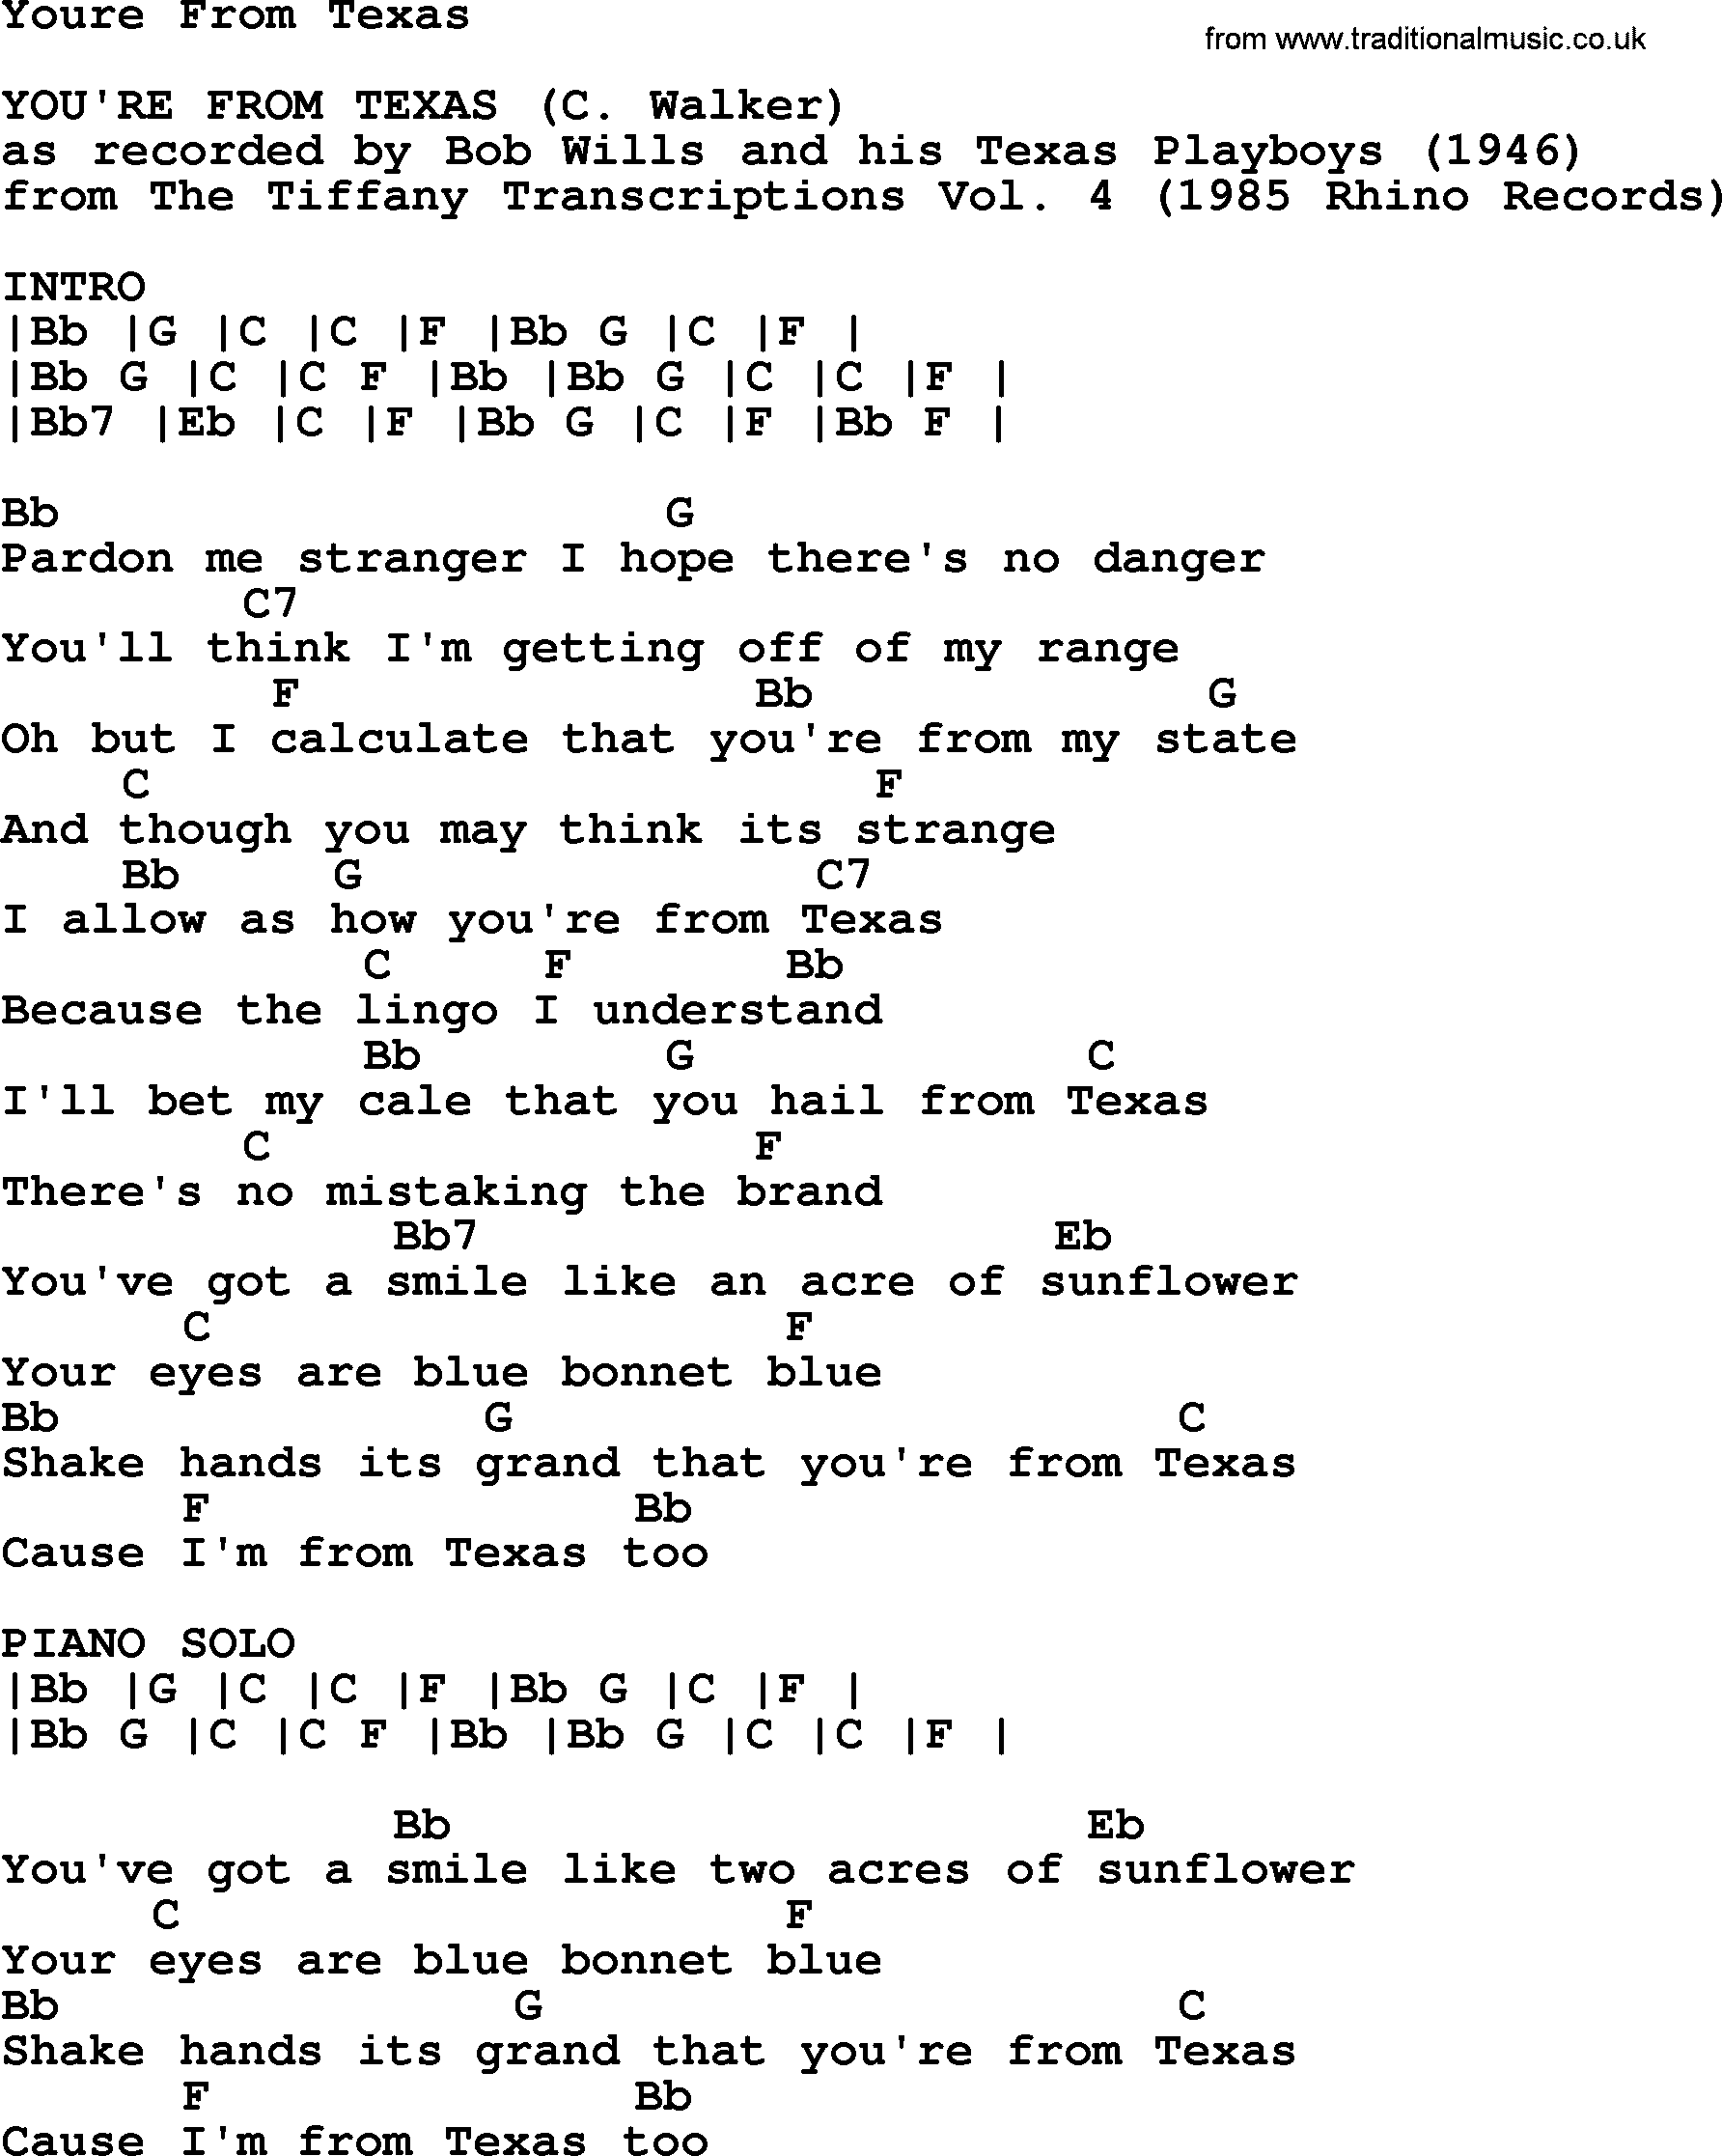 Bluegrass song: Youre From Texas, lyrics and chords